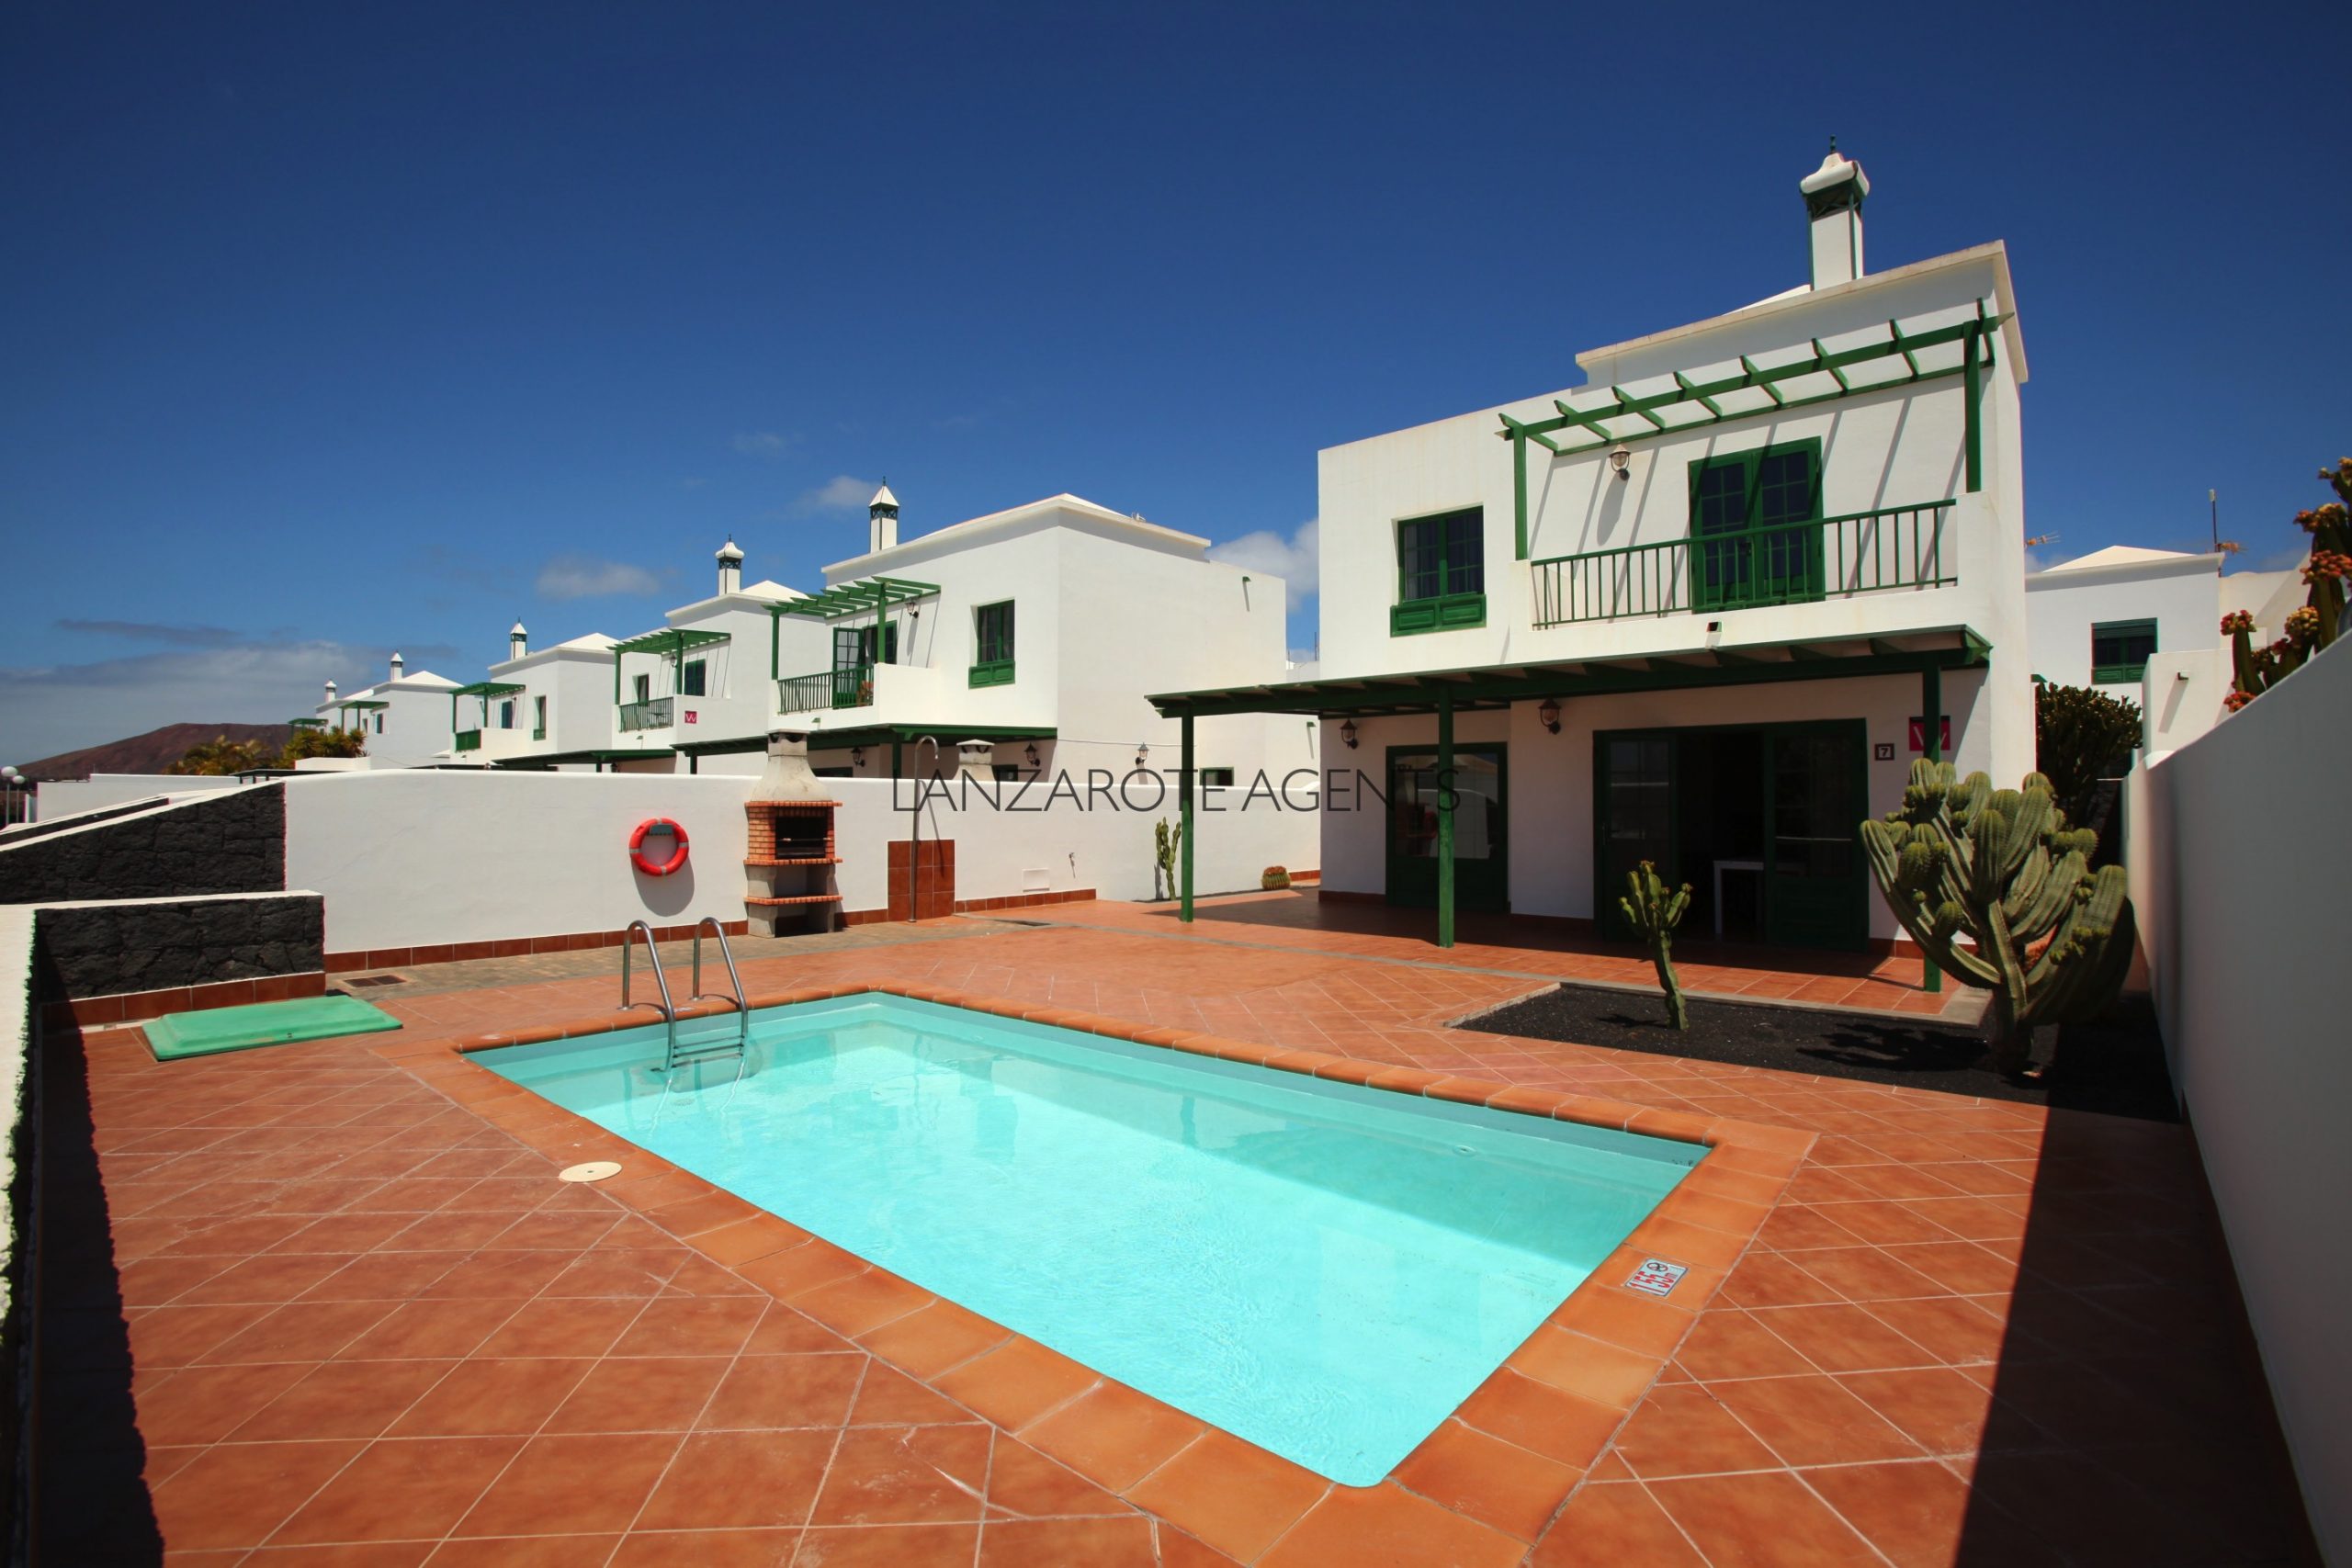 Detached Villa in Playa Blanca Town Centre 3 Bedroom Villa with Private Pool and Panoramic Views of the Sea and Vv Tourist License